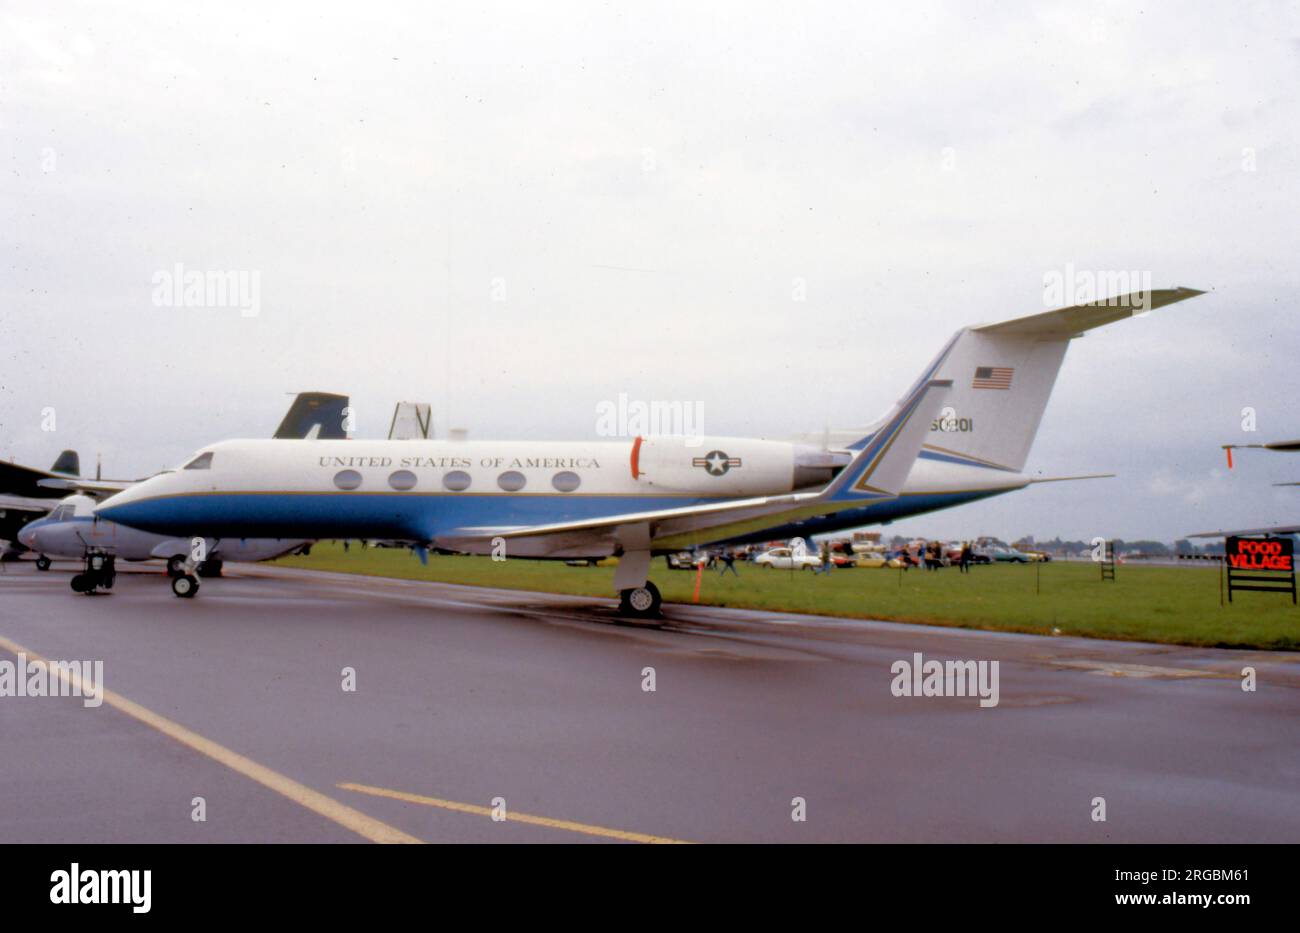 United States Air Force (USAF) - Gulfstream C-20B 86-0201 (msn 470), assigned to the 99th Airlift Squadron, 89th Airlift Wing, Andrews AFB, MD., at RAF Fairford on 18 July 1987. Stock Photo